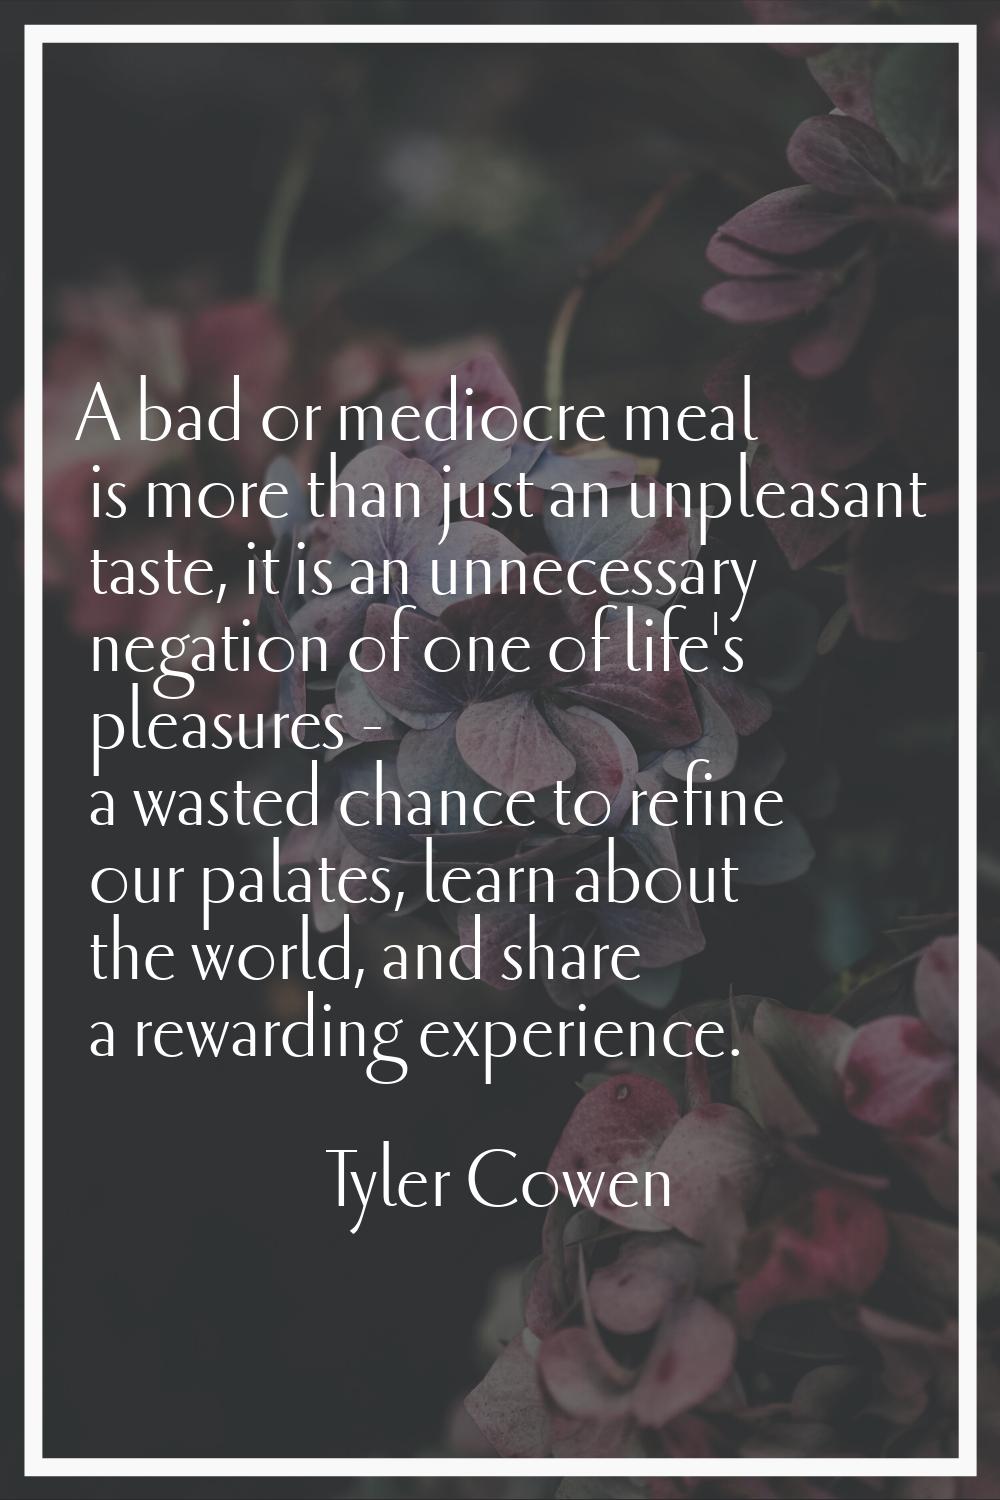 A bad or mediocre meal is more than just an unpleasant taste, it is an unnecessary negation of one 